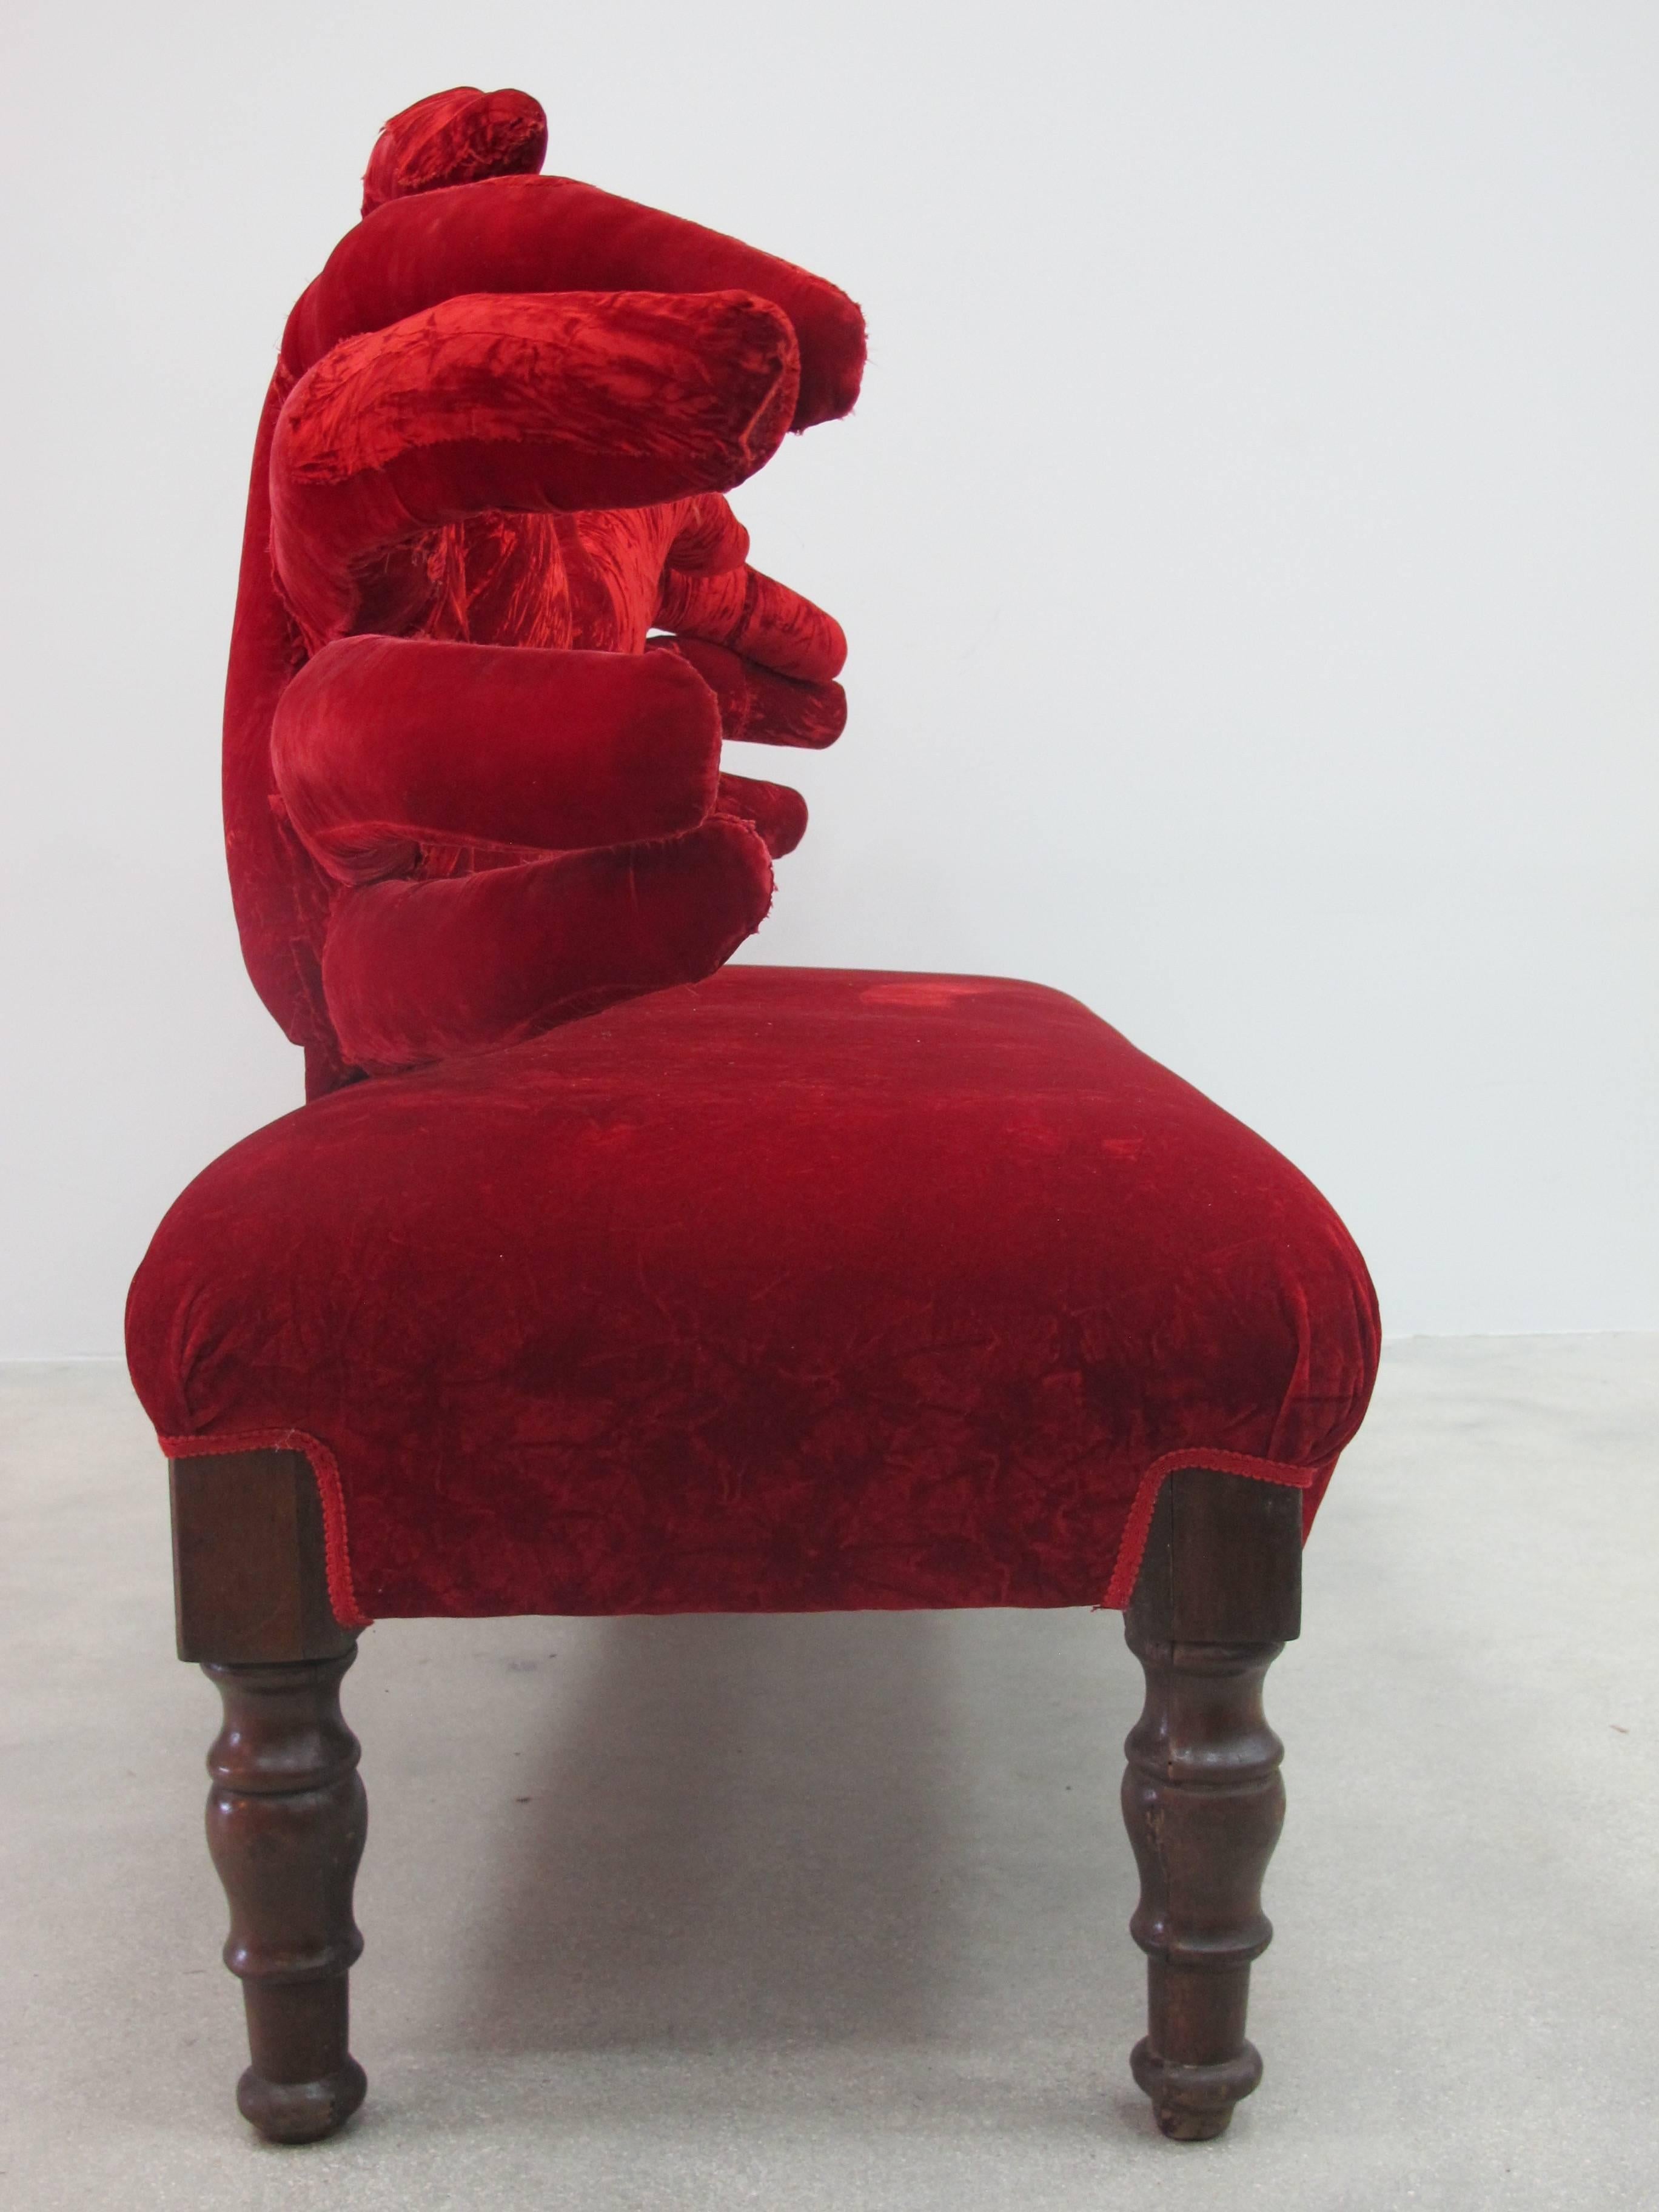 Two handed sofa by the Italian designer Carla Tolomeo (b. 1945) made in the early 1990s in red velvet with large hands as the back rest. The piece is signed on the leg.

 